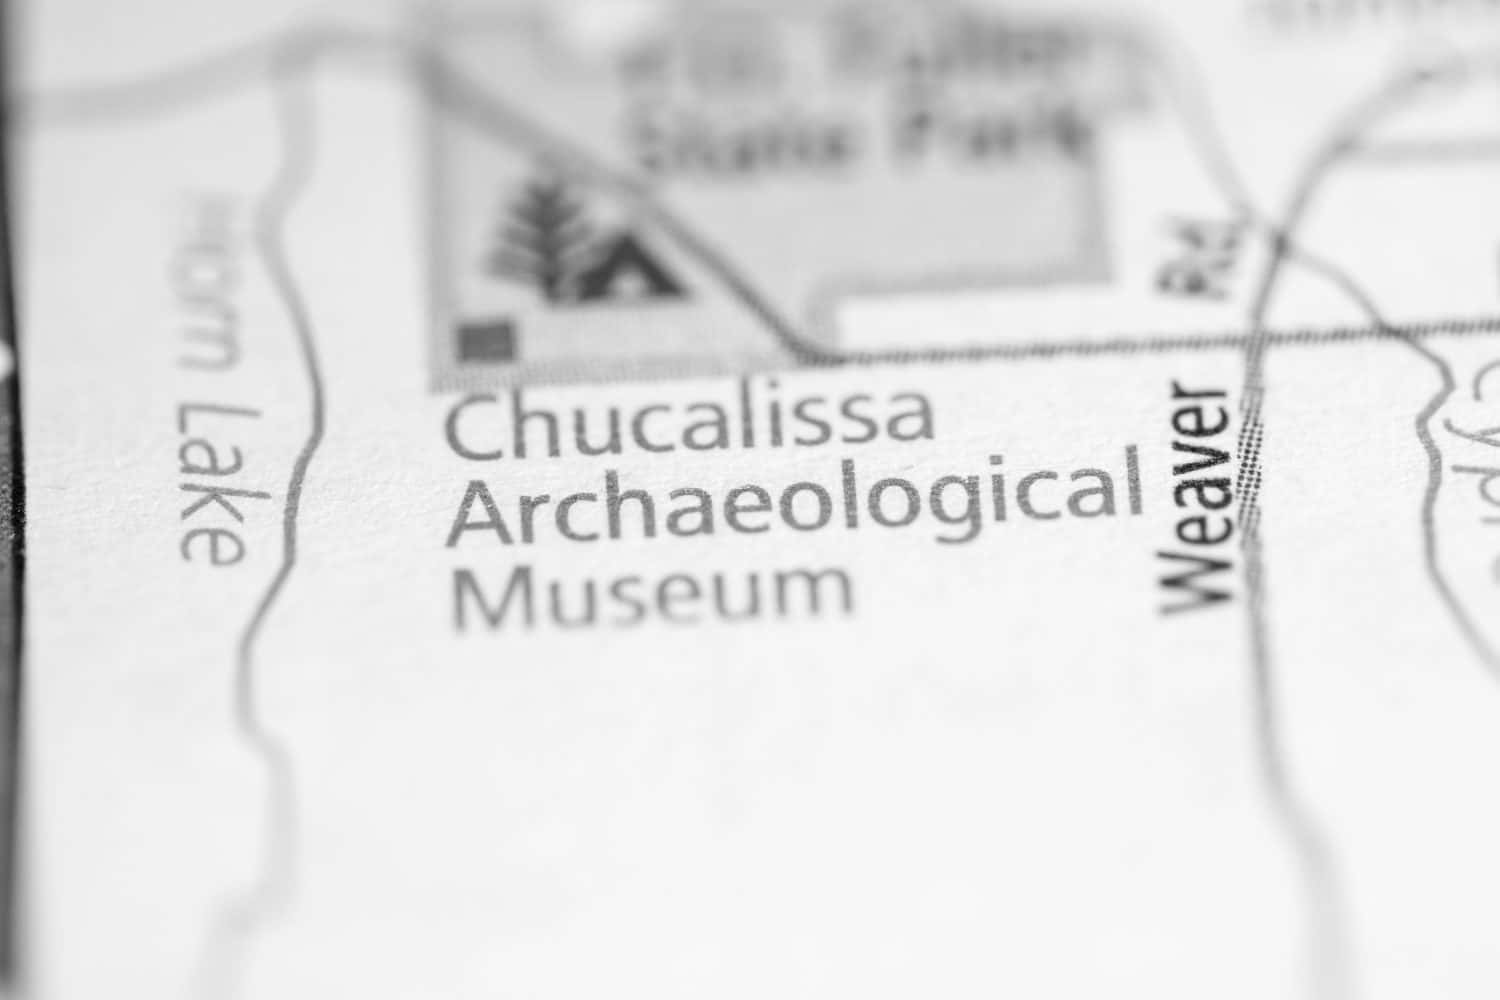 Chucalissa Archaeological Museum. Tennessee. USA